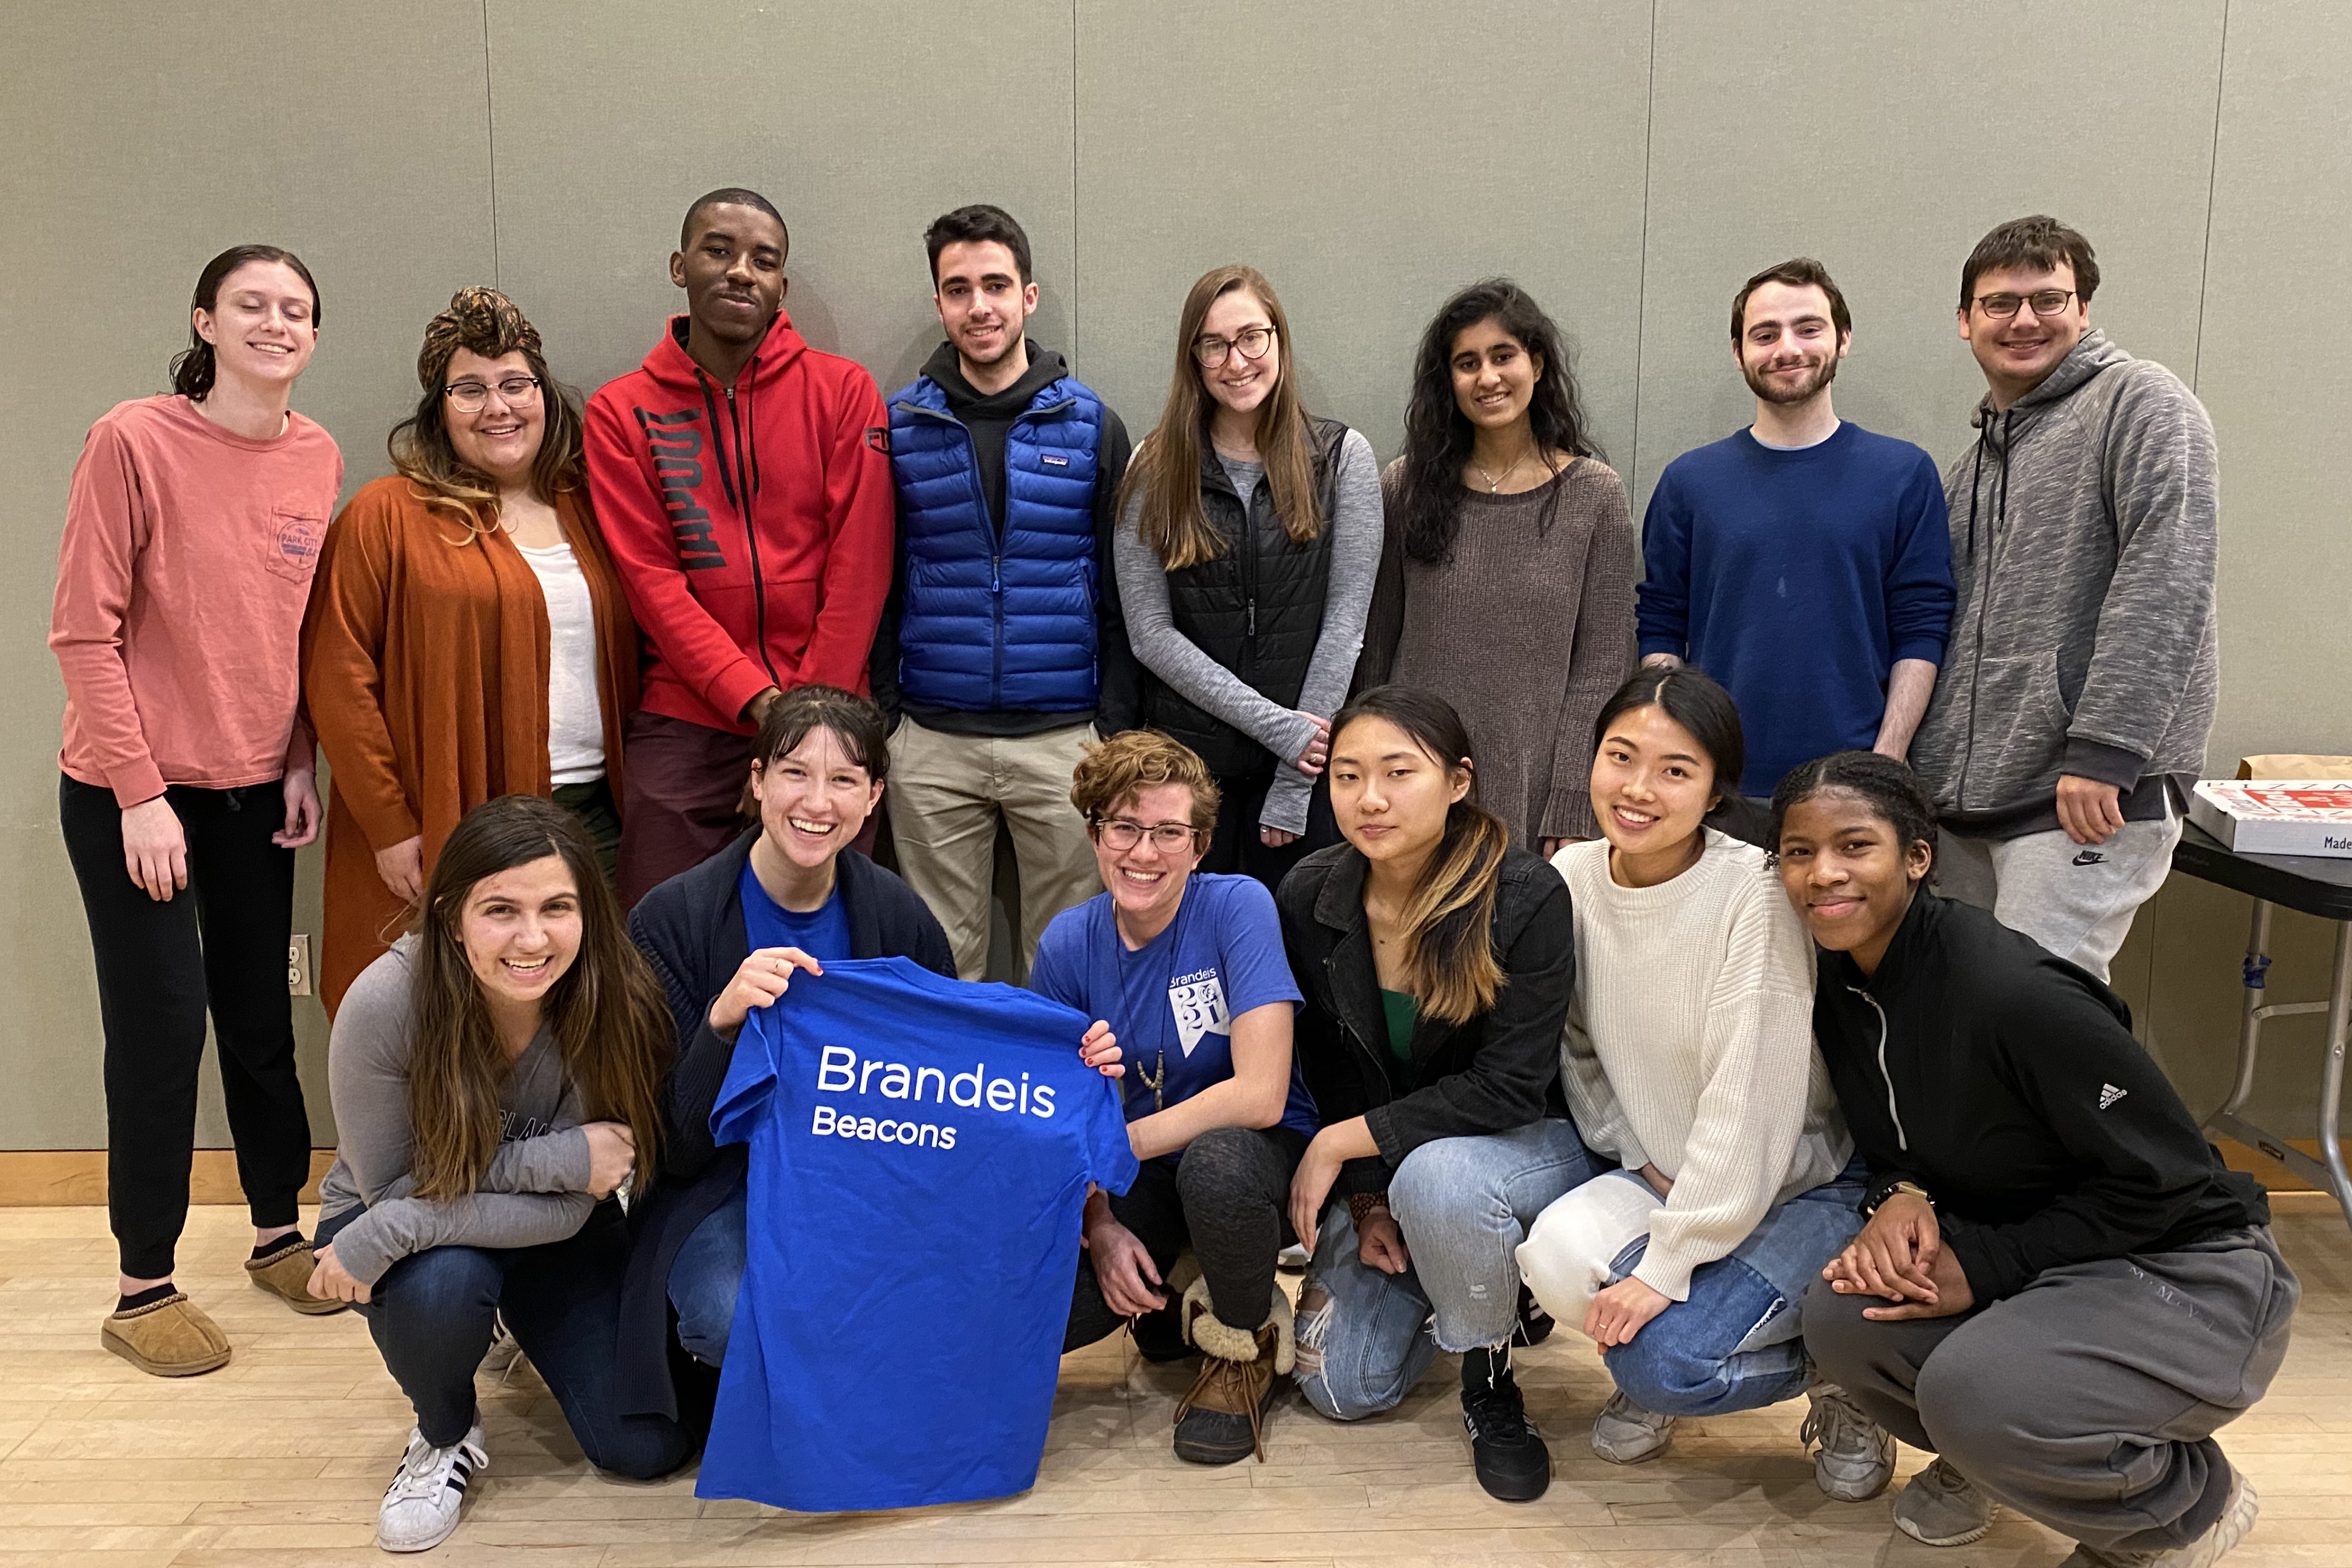 Members of the Brandeis Beacons posing together in the Shapiro Campus Center Multi-Purpose Room at their February Meeting.